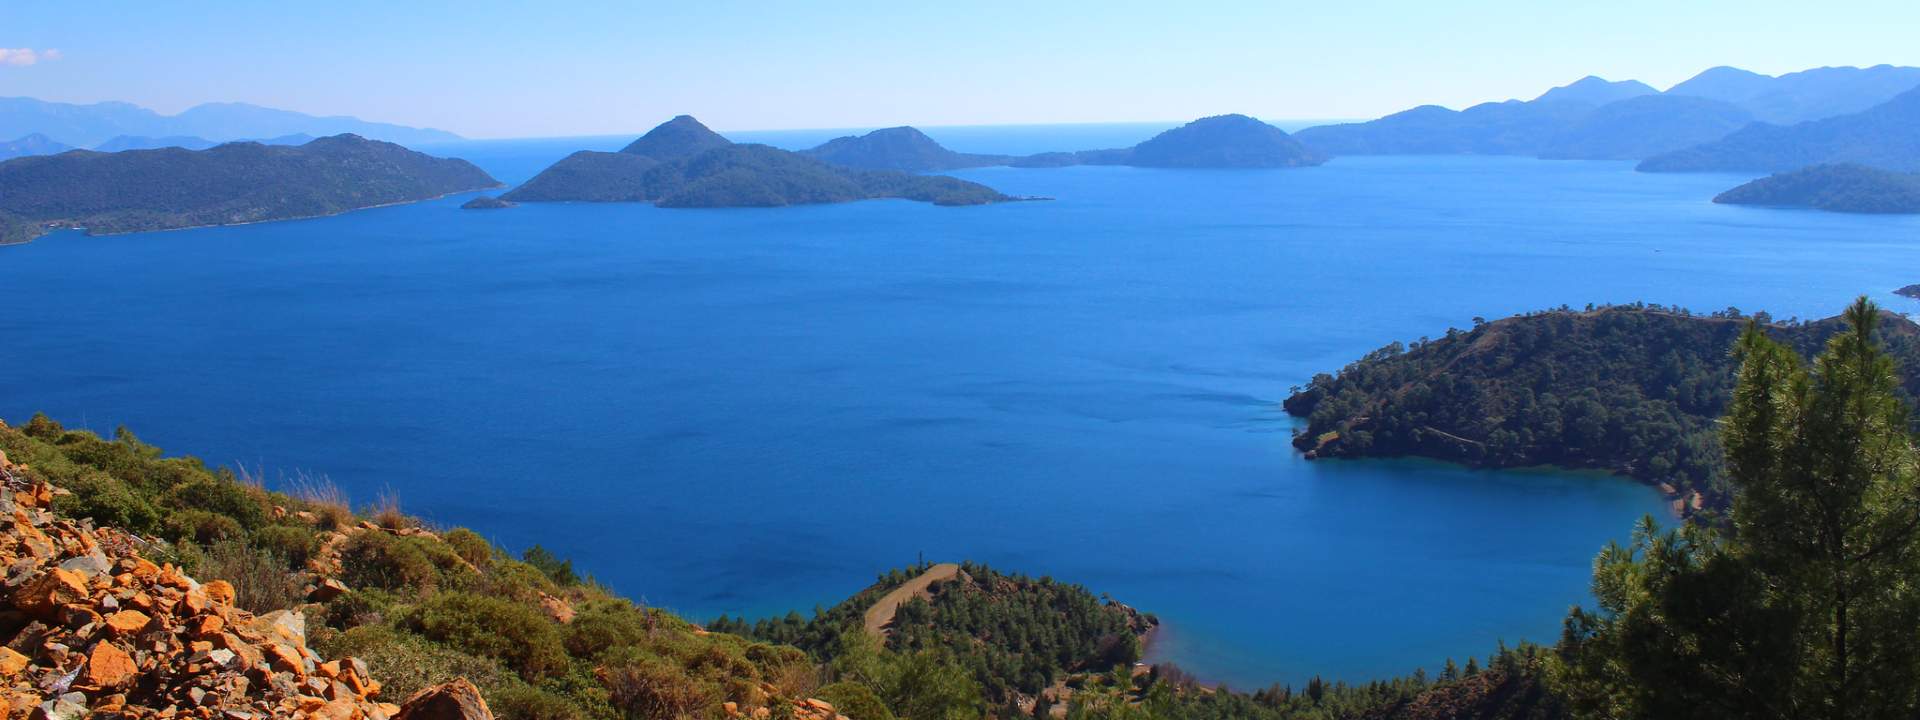 Discover Marmaris aboard a traditional gulet